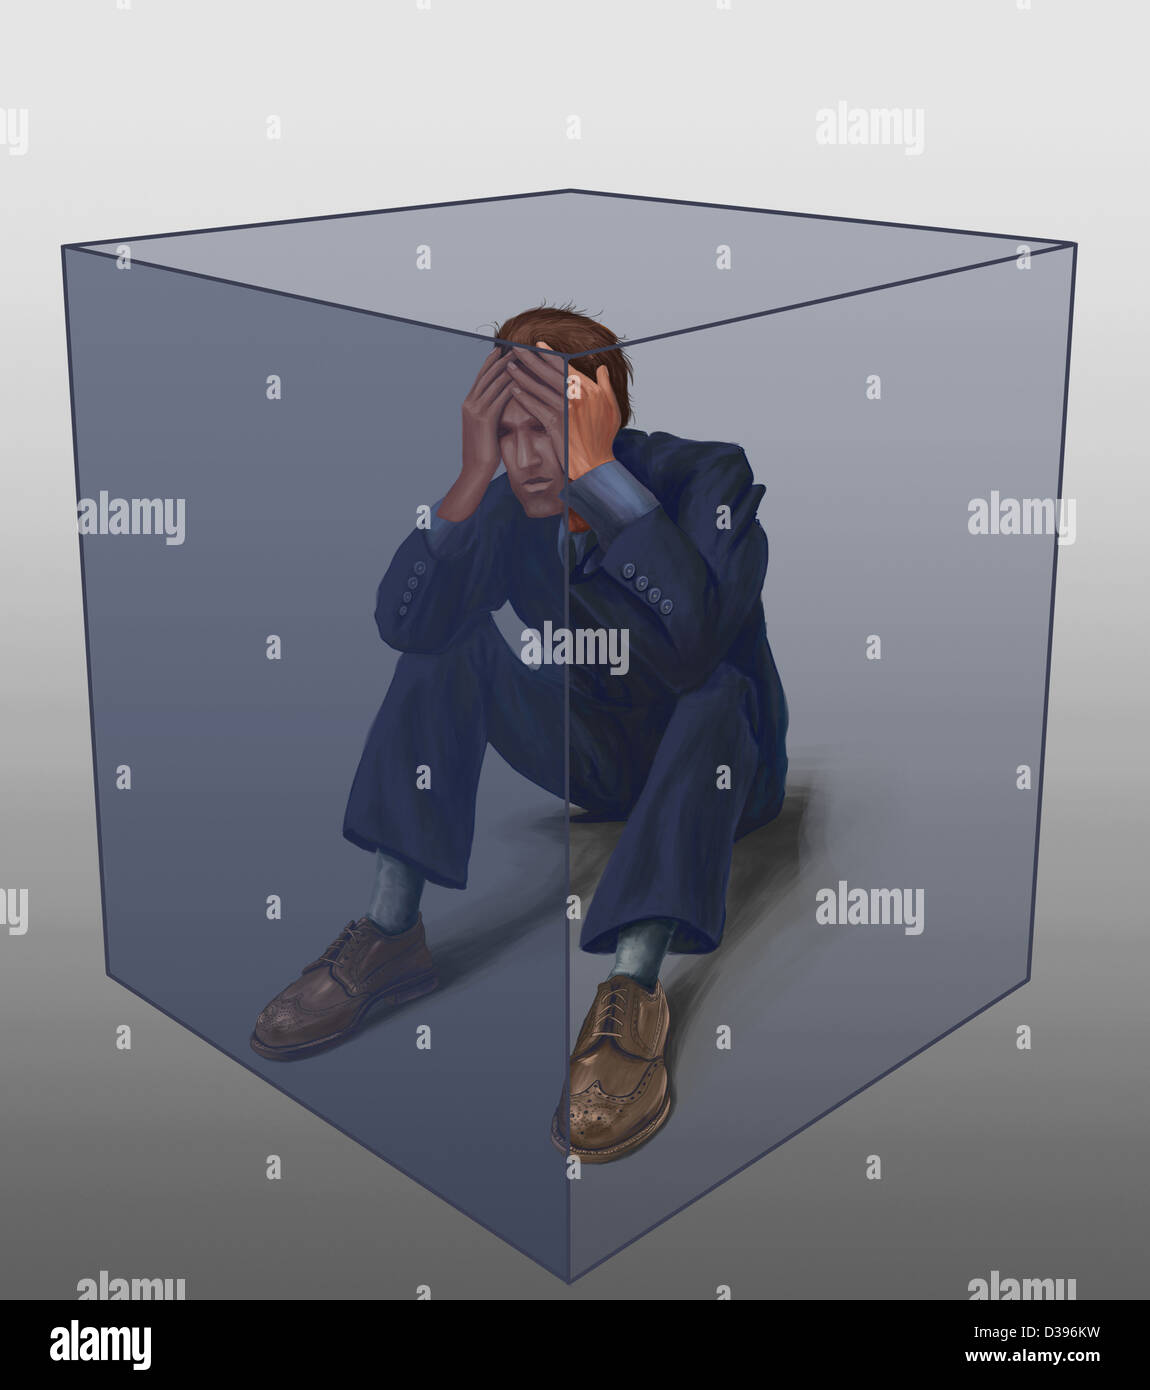 Illustration of exhausted businessman captive in transparent cube over colored background Stock Photo